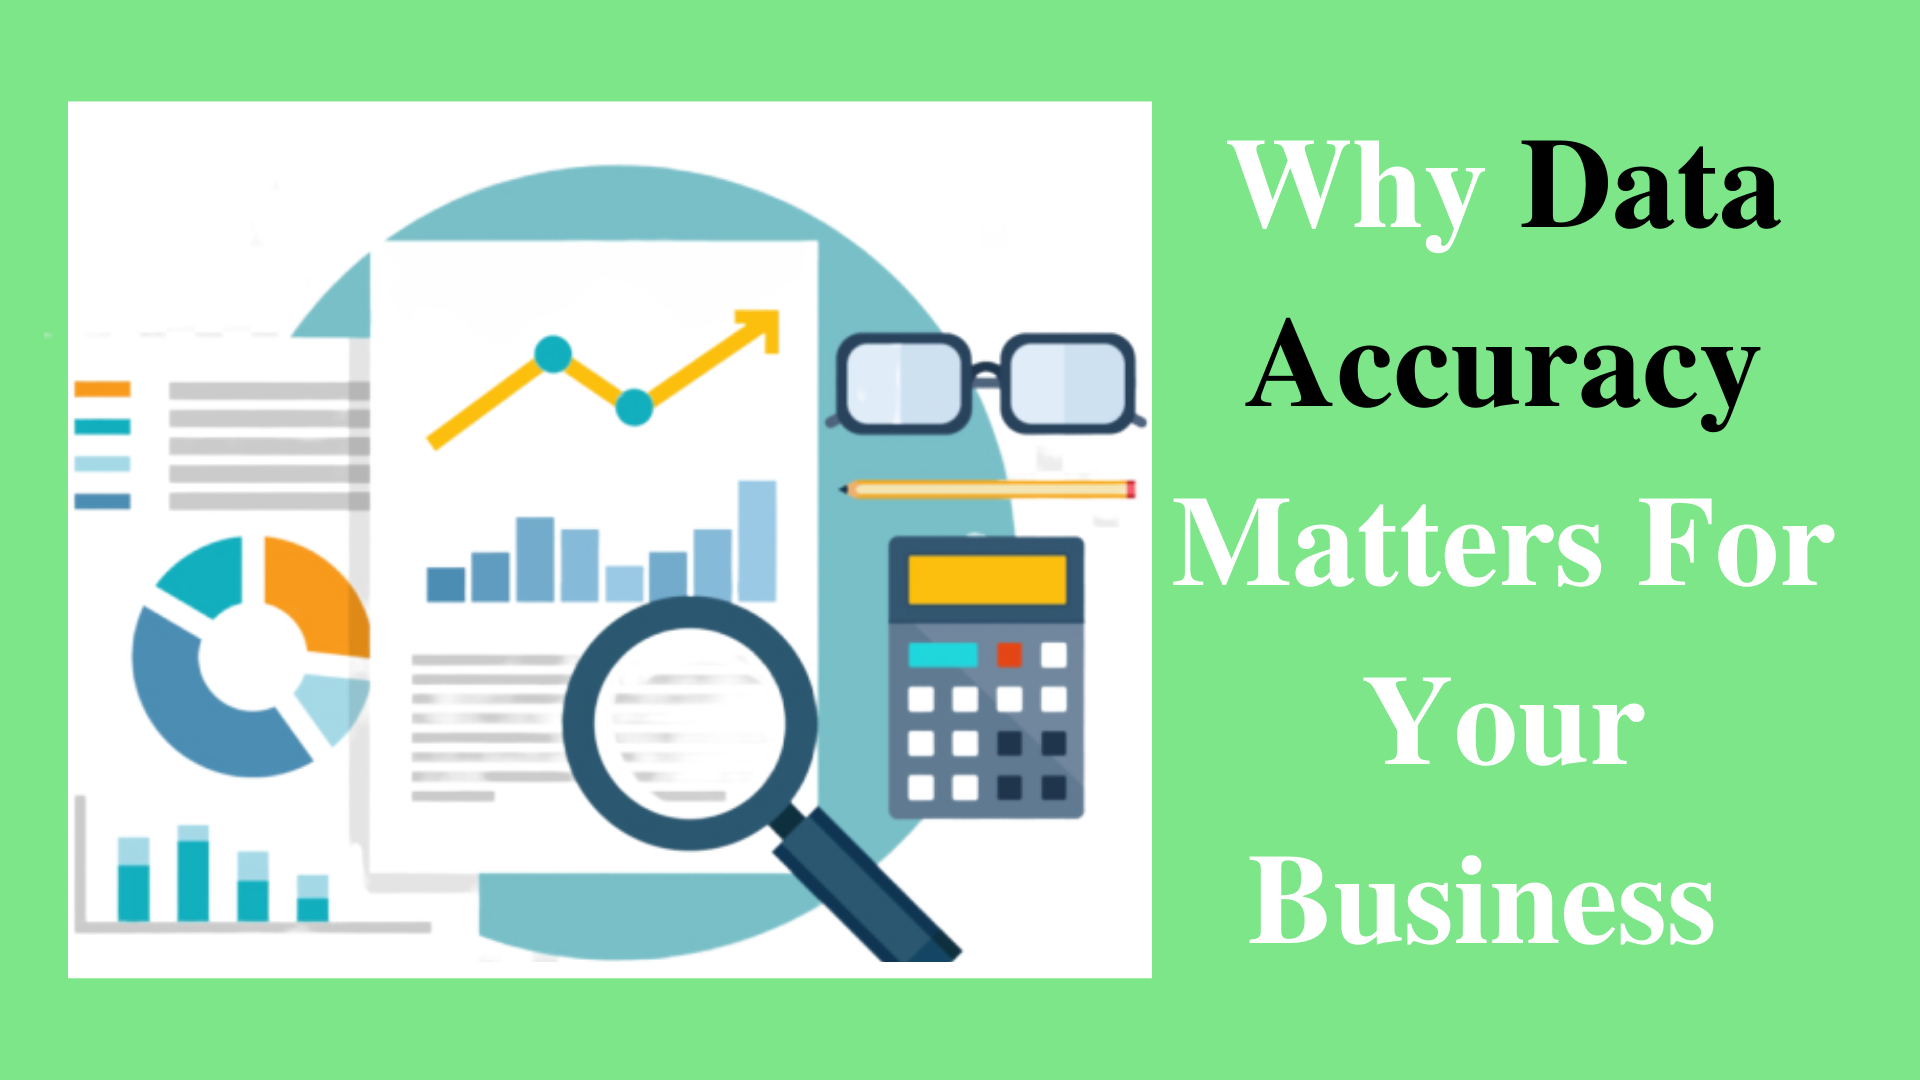 Check Out 5 Reasons Why Data Accuracy Matters For Your Business. Verify Why Businesses Should Care About Data Accuracy. Check Benefits of Good Data Quality